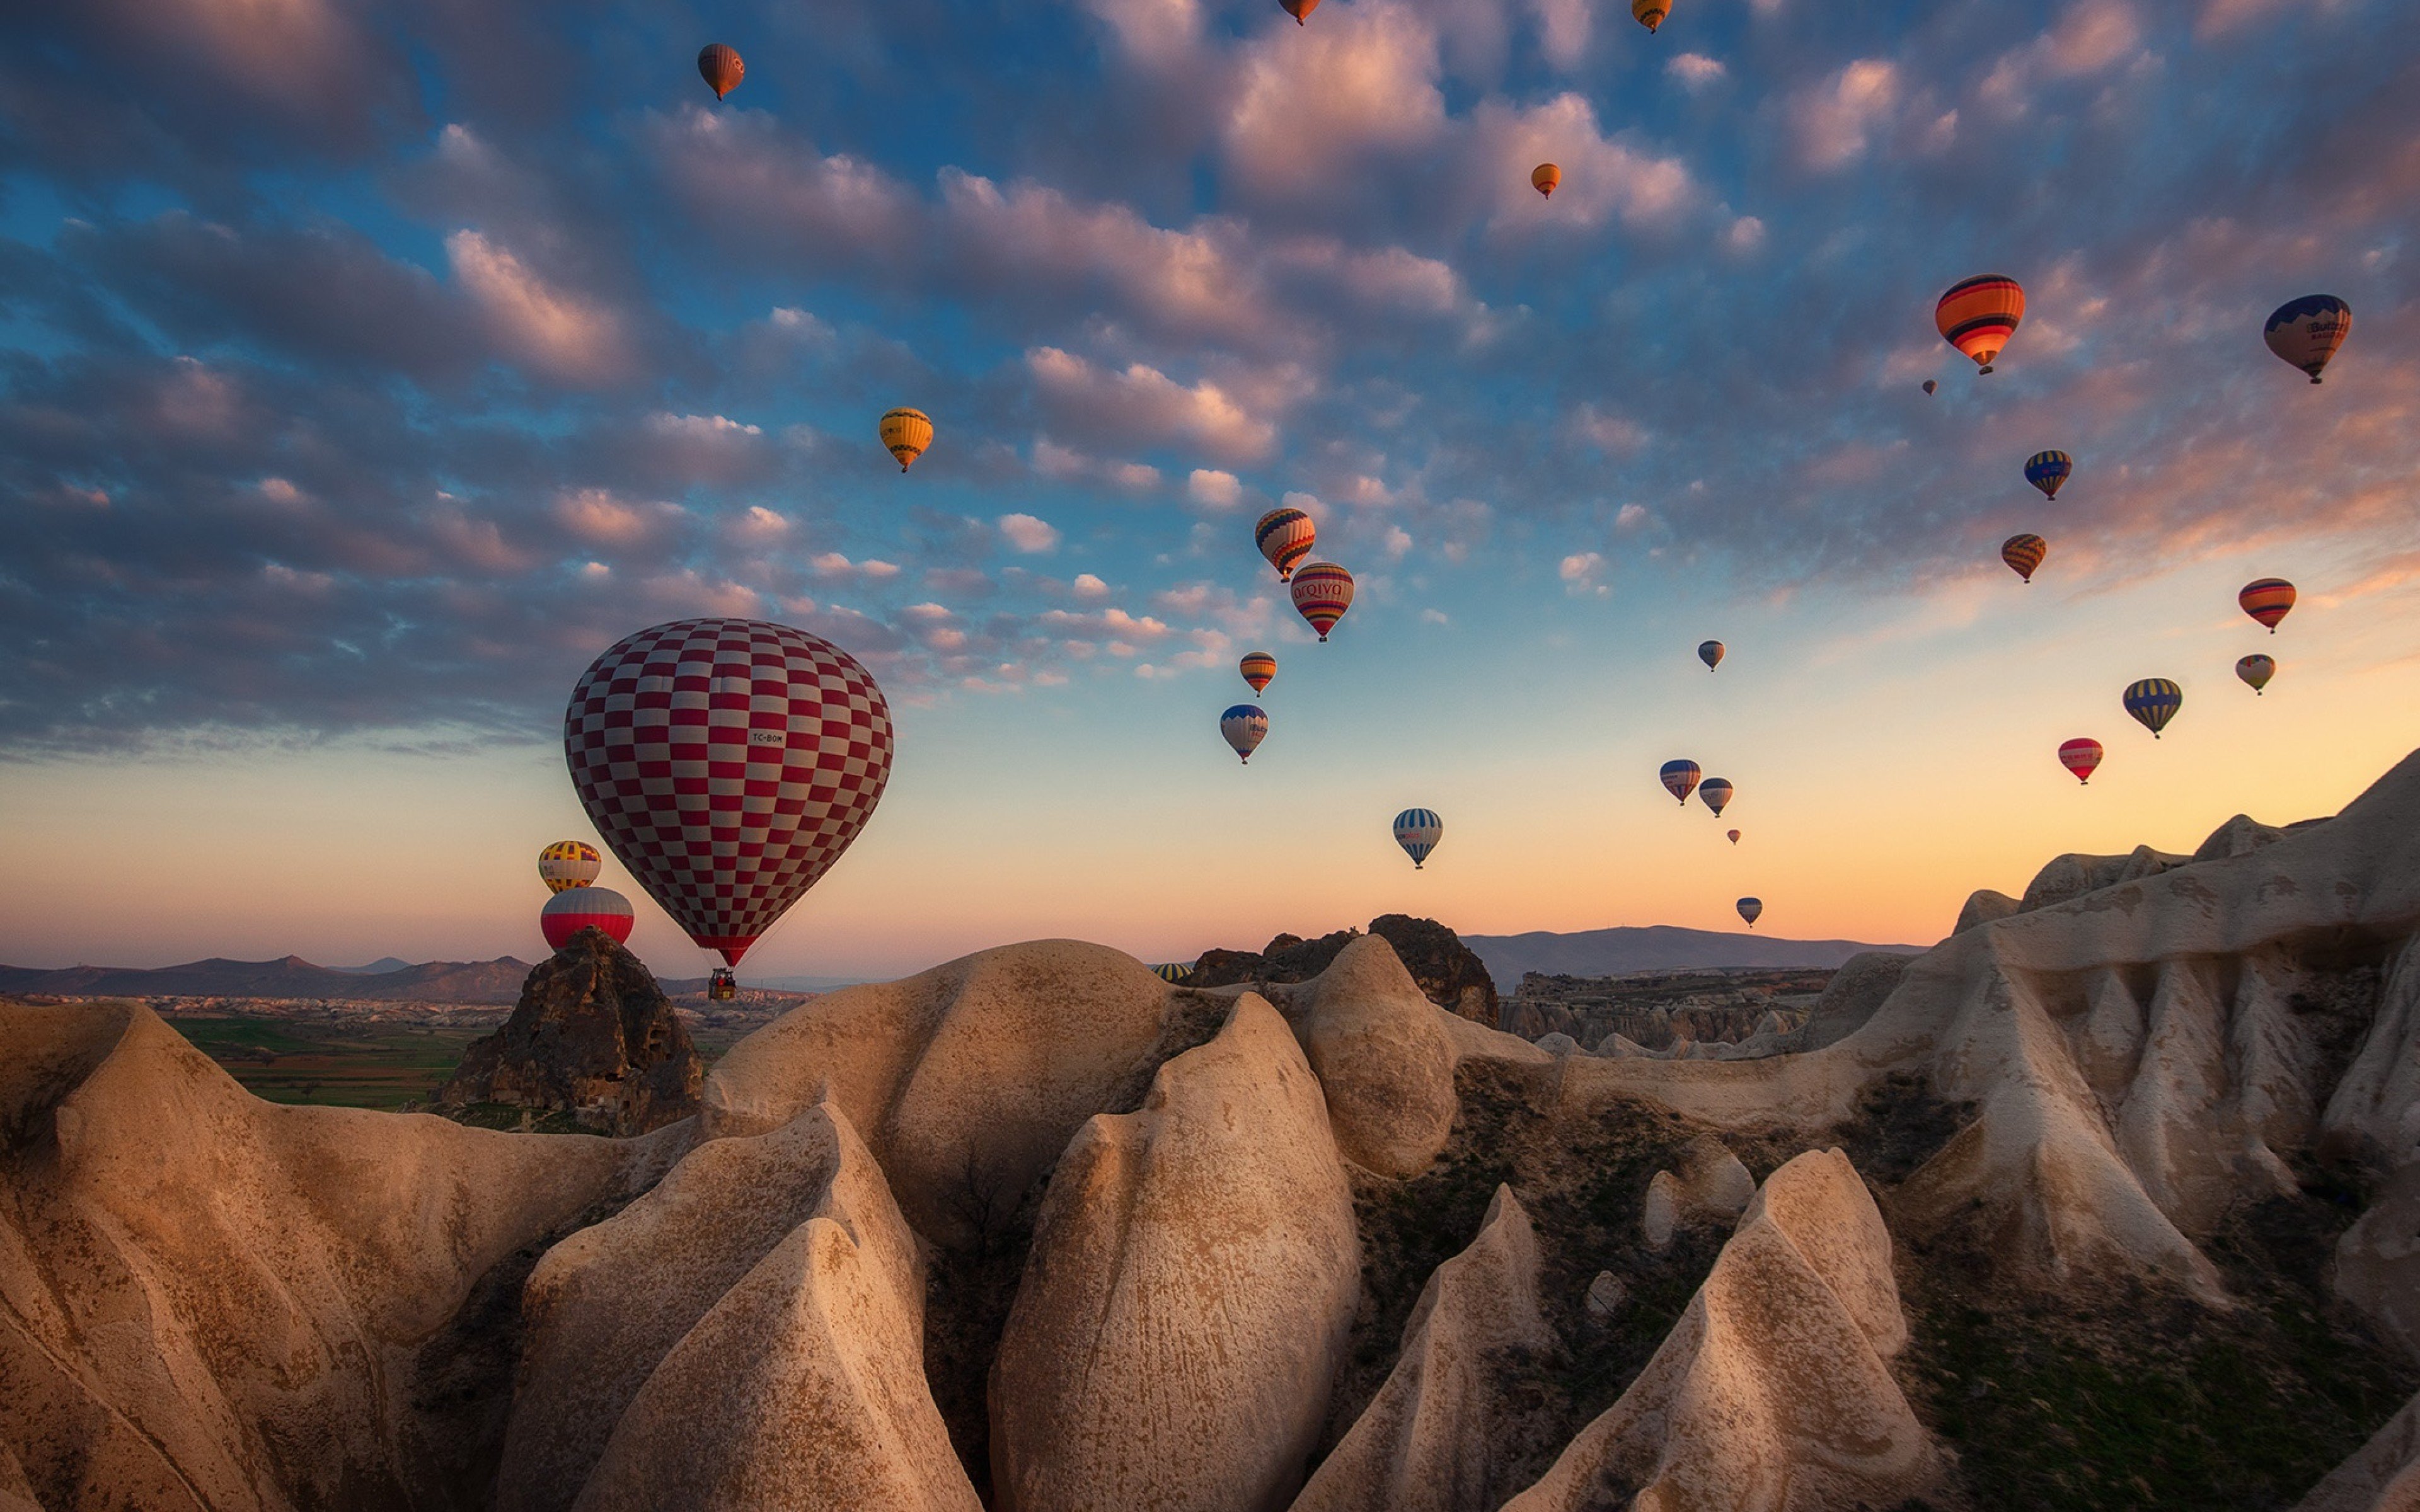 Wallpaper Hot Air Balloons in mountains at sunset